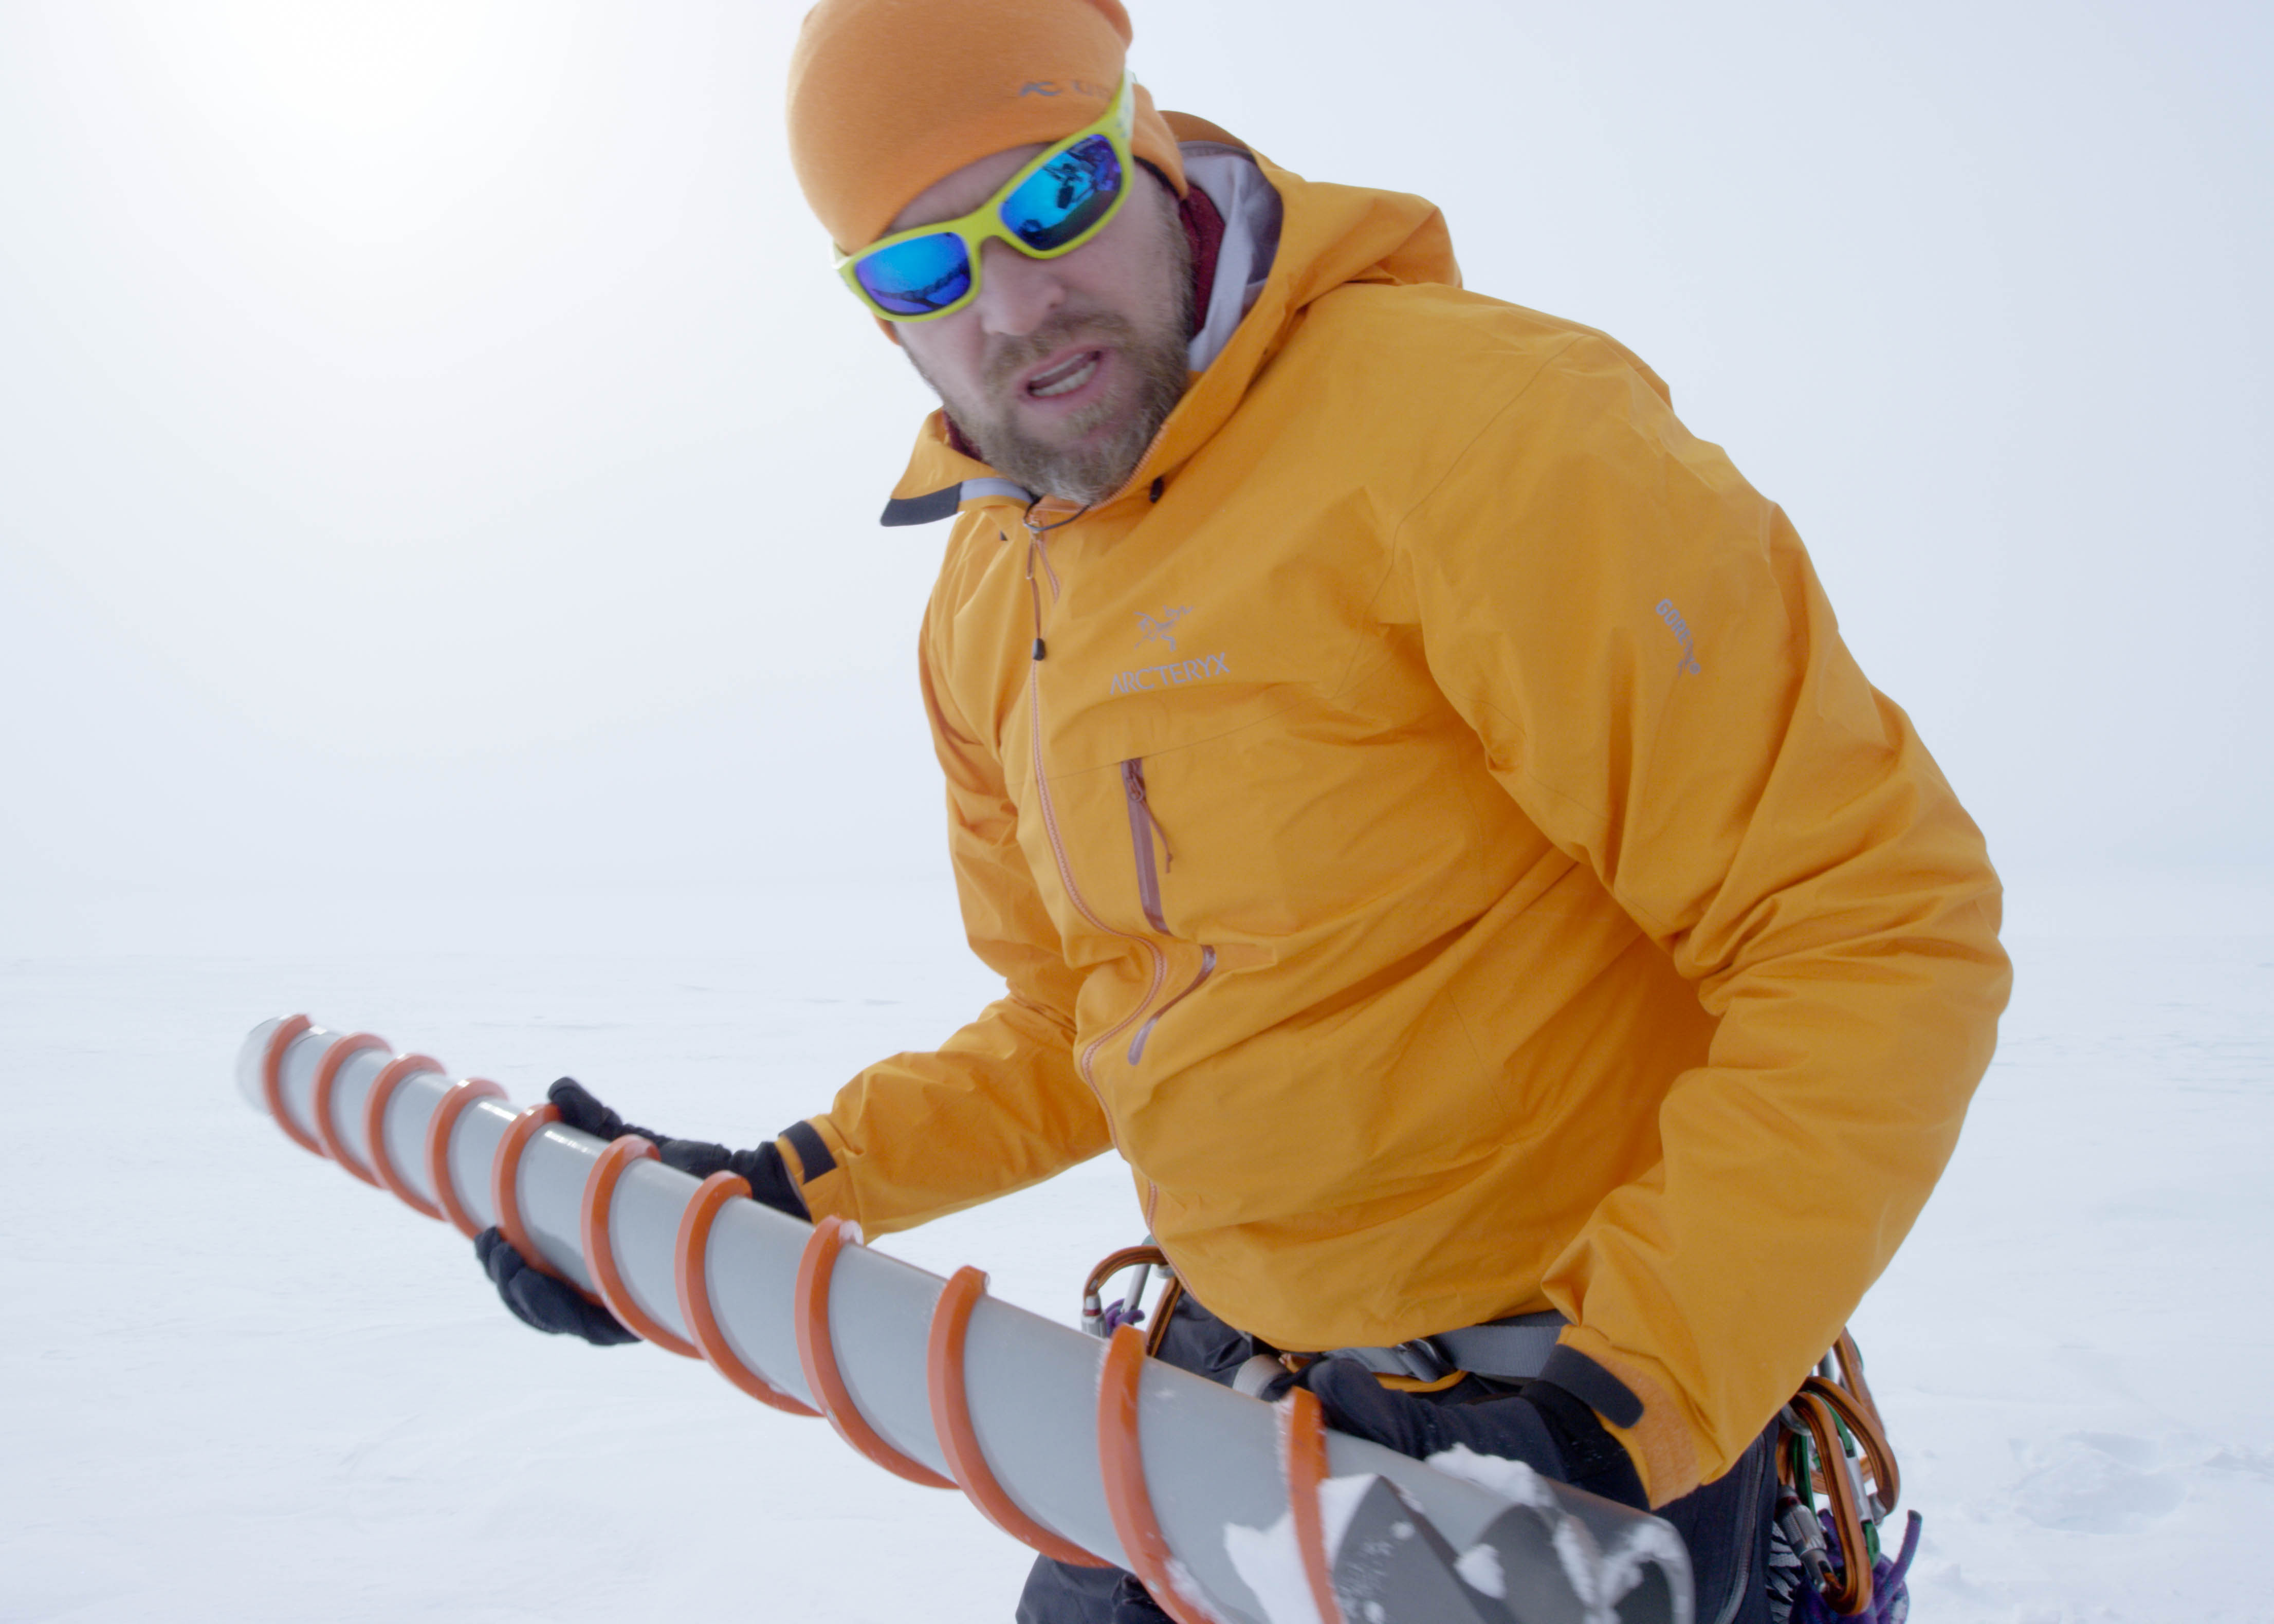 Glacier scientist Jason Box holds a study instrument in both hands while in cold weather gear in the snow